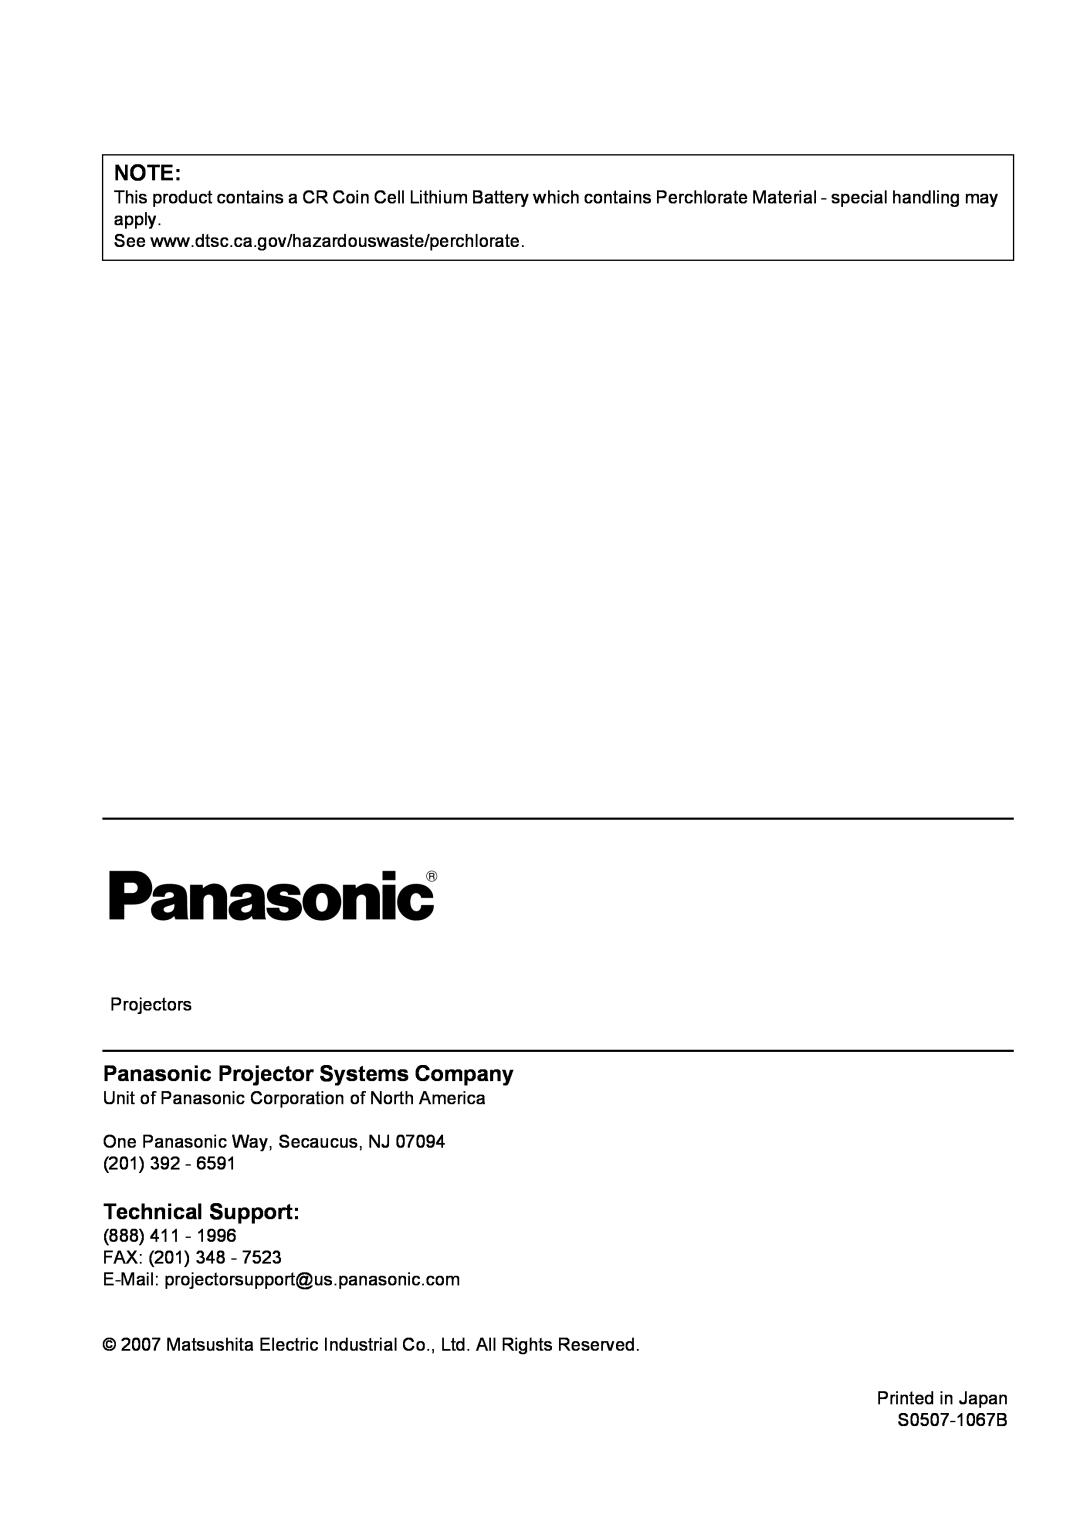 Panasonic PT-FW100NTU Panasonic Projector Systems Company, Technical Support, Projectors, Printed in Japan S0507-1067B 